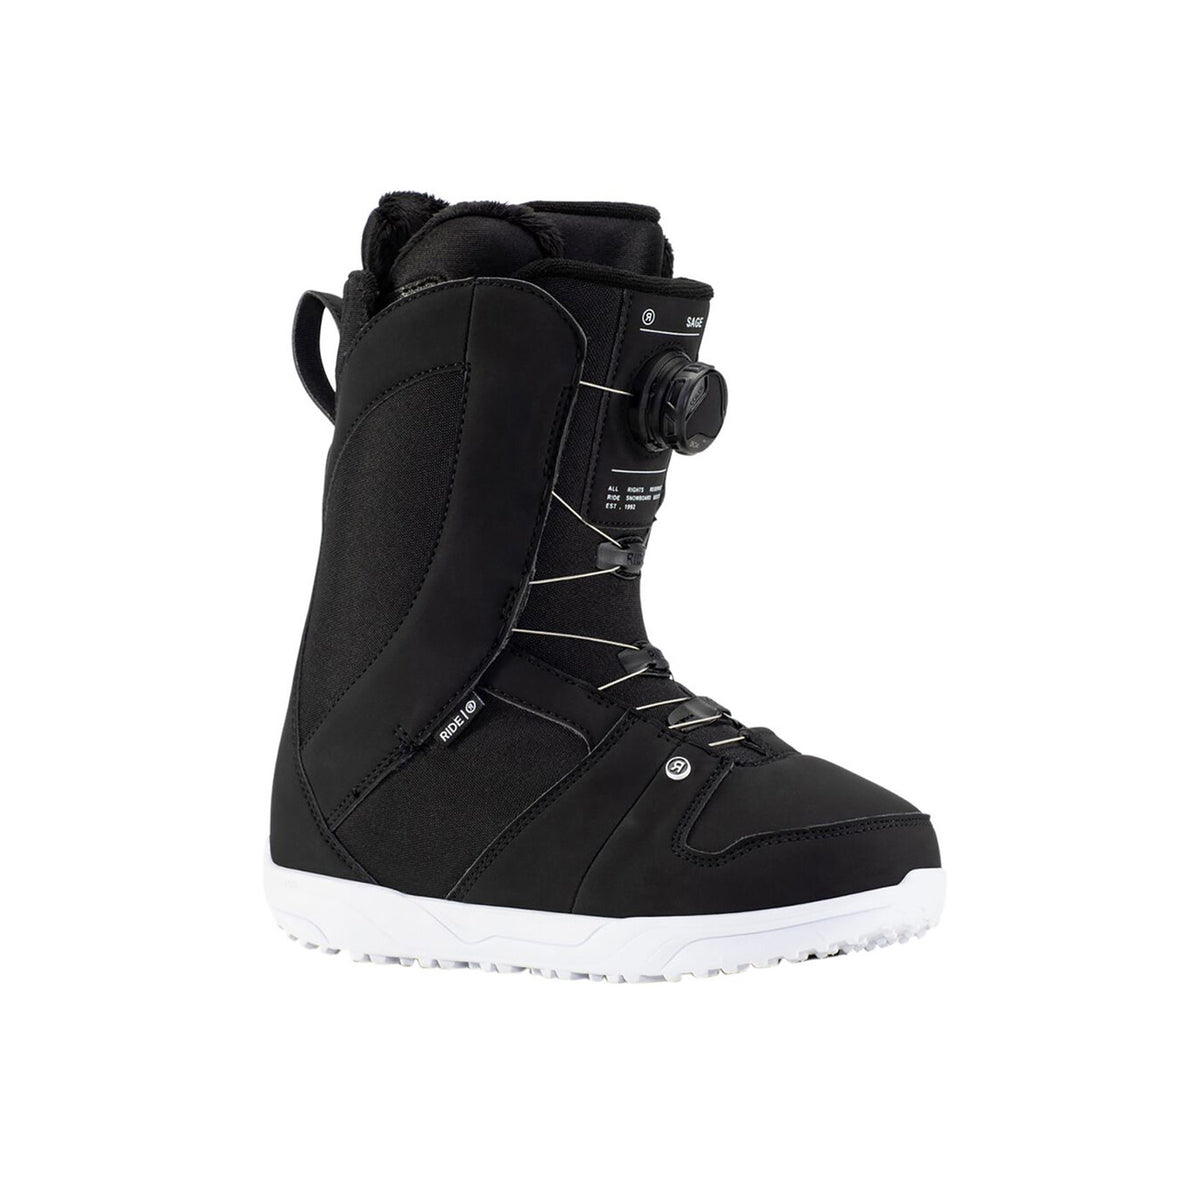 Hero image features the Ride Sage snowboard boot in black with a white sole and white laces.